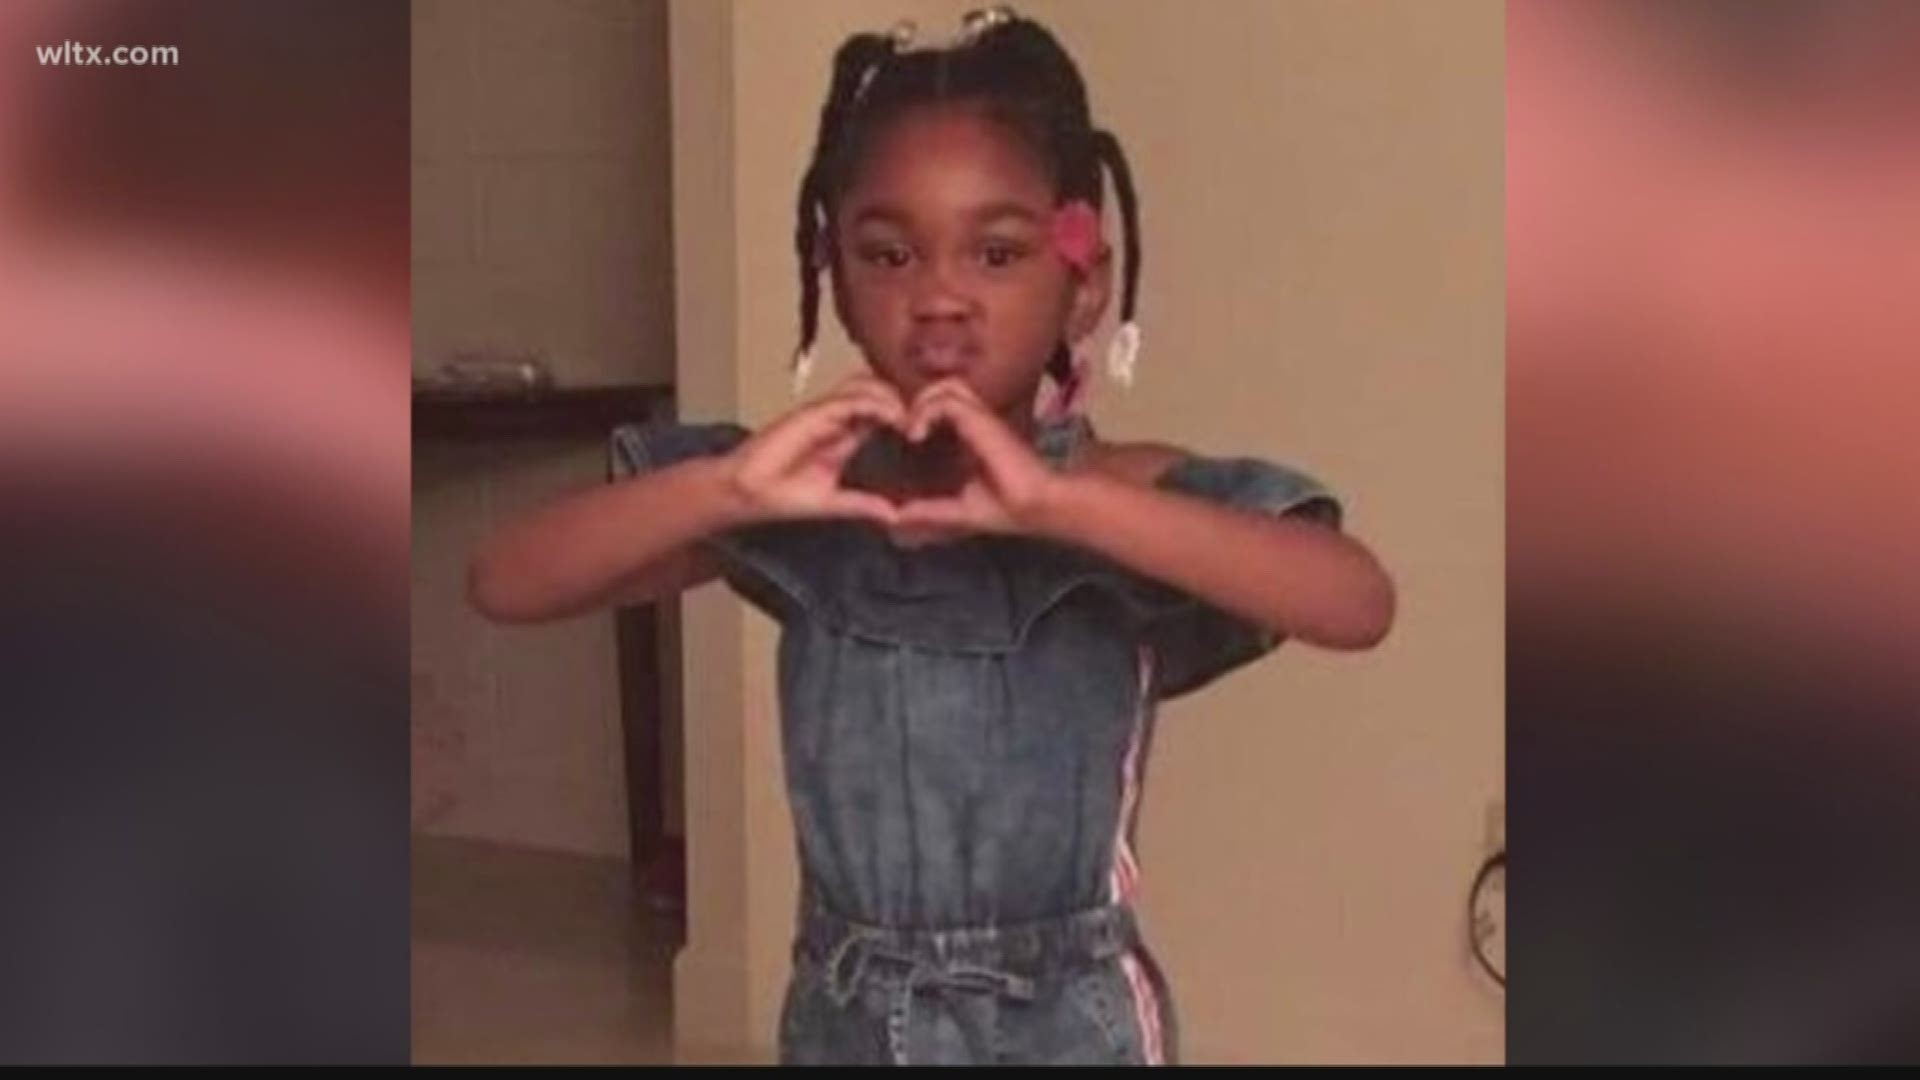 Roughly 60 people are now searching a landfill in Richland County for signs and evidence of the little girl, who police say was killed last month.